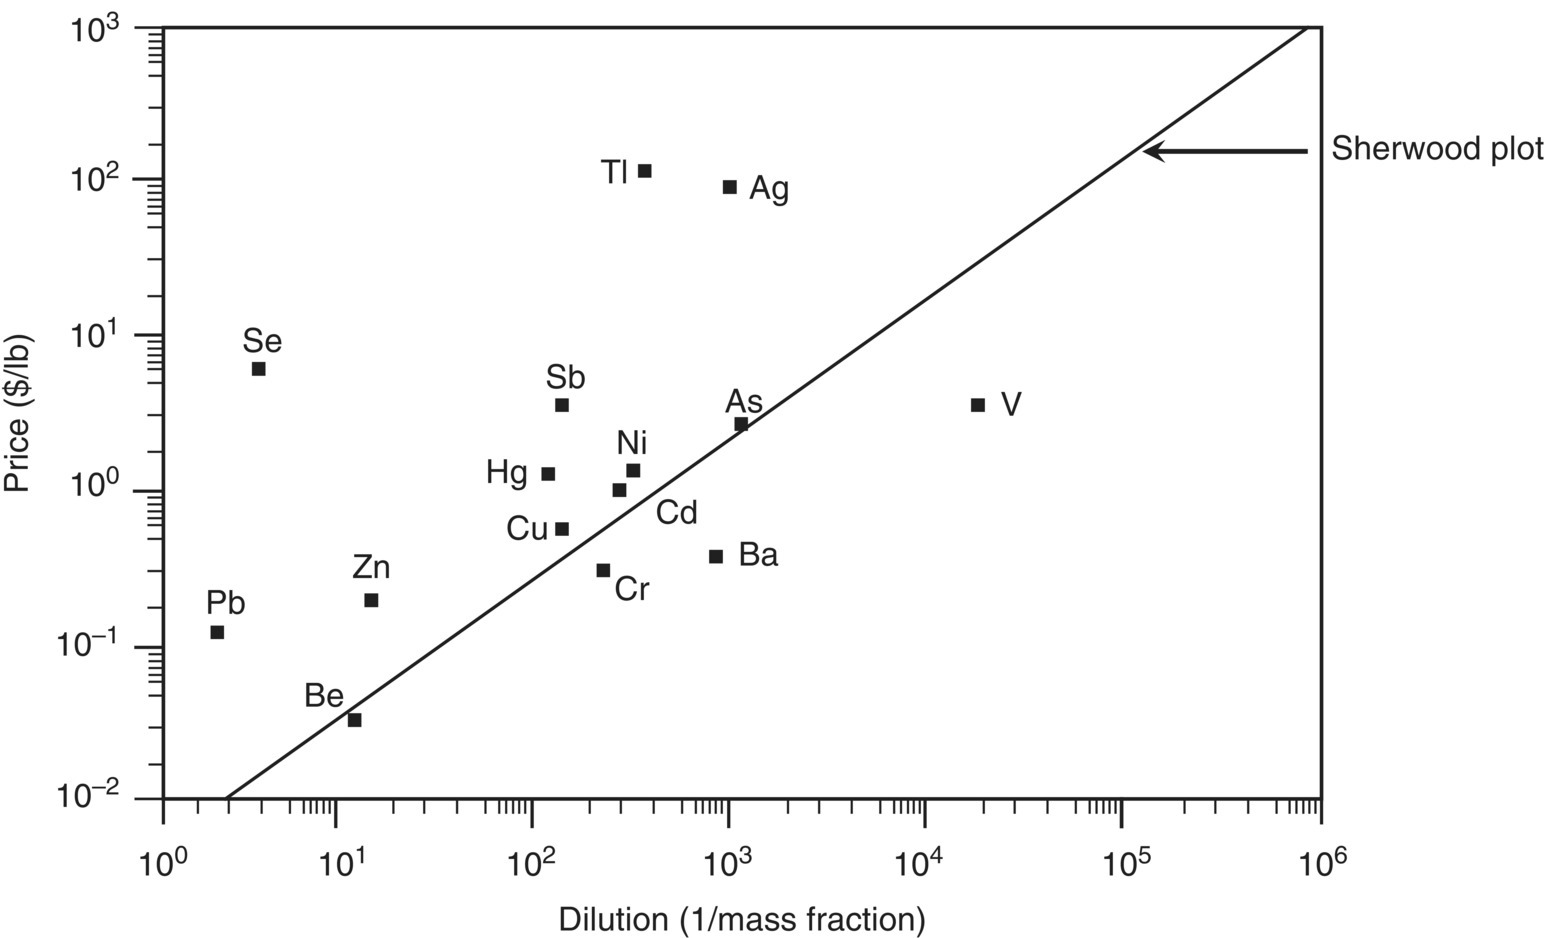 Graph of price ($/lb) versus dilution (1/mass fraction) displaying a positive slope line for Sherwood plot, with scattered solid square markers labeled Se, Pb, Be, Zn, Hg, Cu, Cr, Ba, Cd, Ni, Sb, As, V, Ag, and TI.